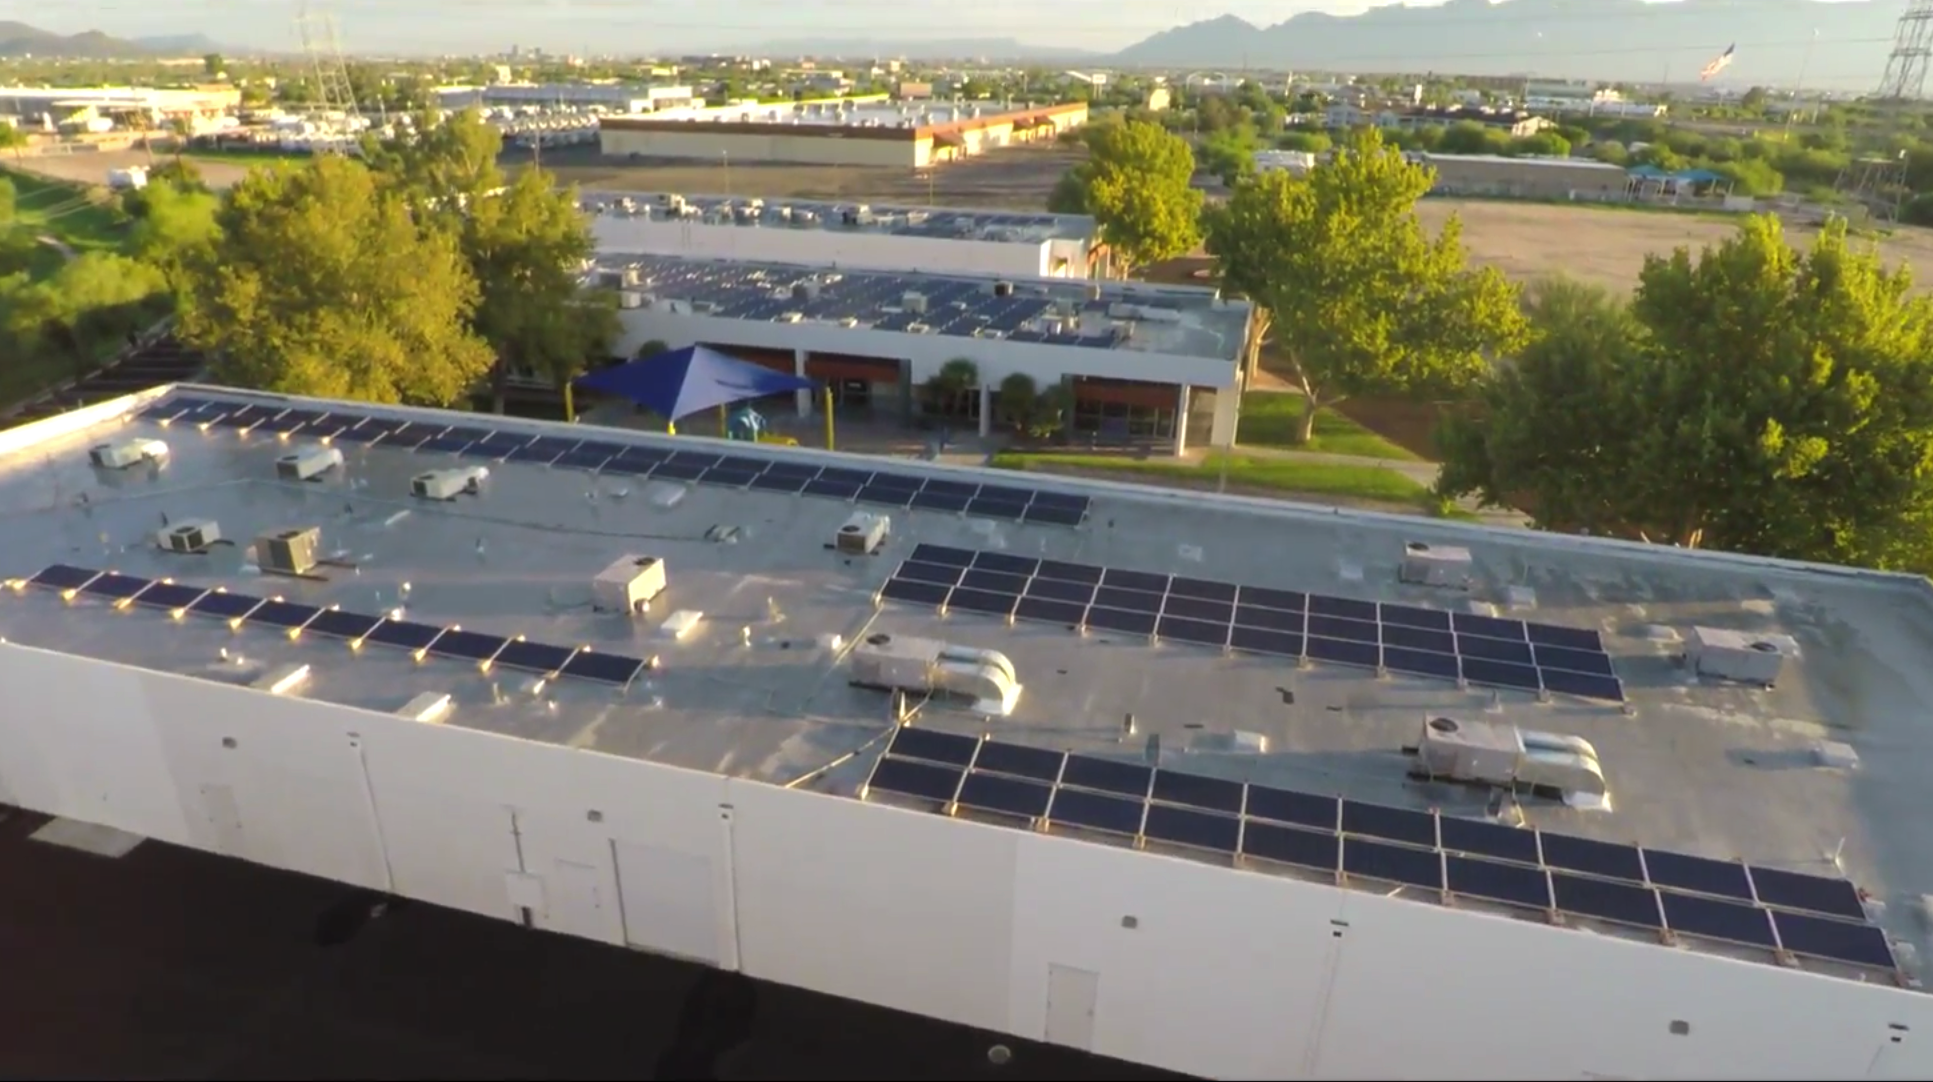  150 kW Roof Mounted System - Calvary West Campus, Chapel &amp; School (5130-5190 S. Julian)